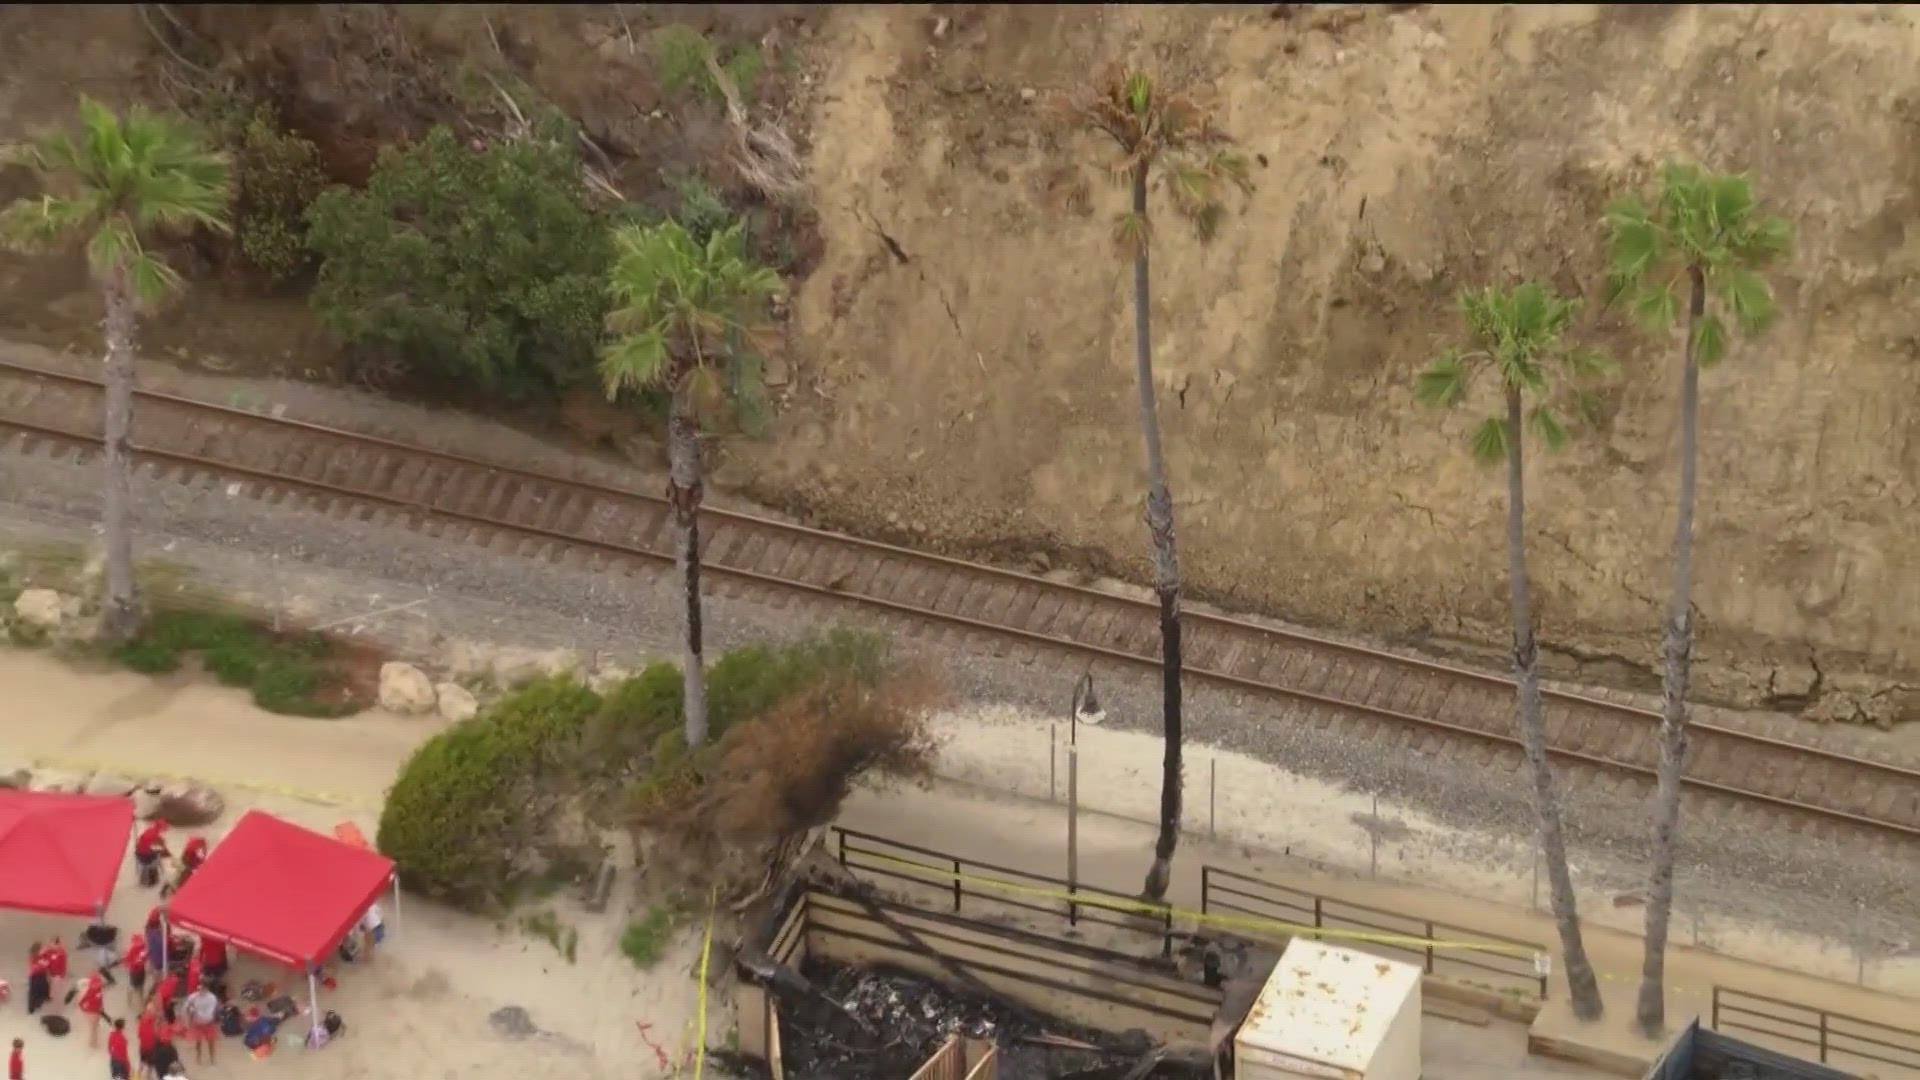 Amtrak Pacific Surfliner's website says the tracks will reopen once the debris has been cleared.